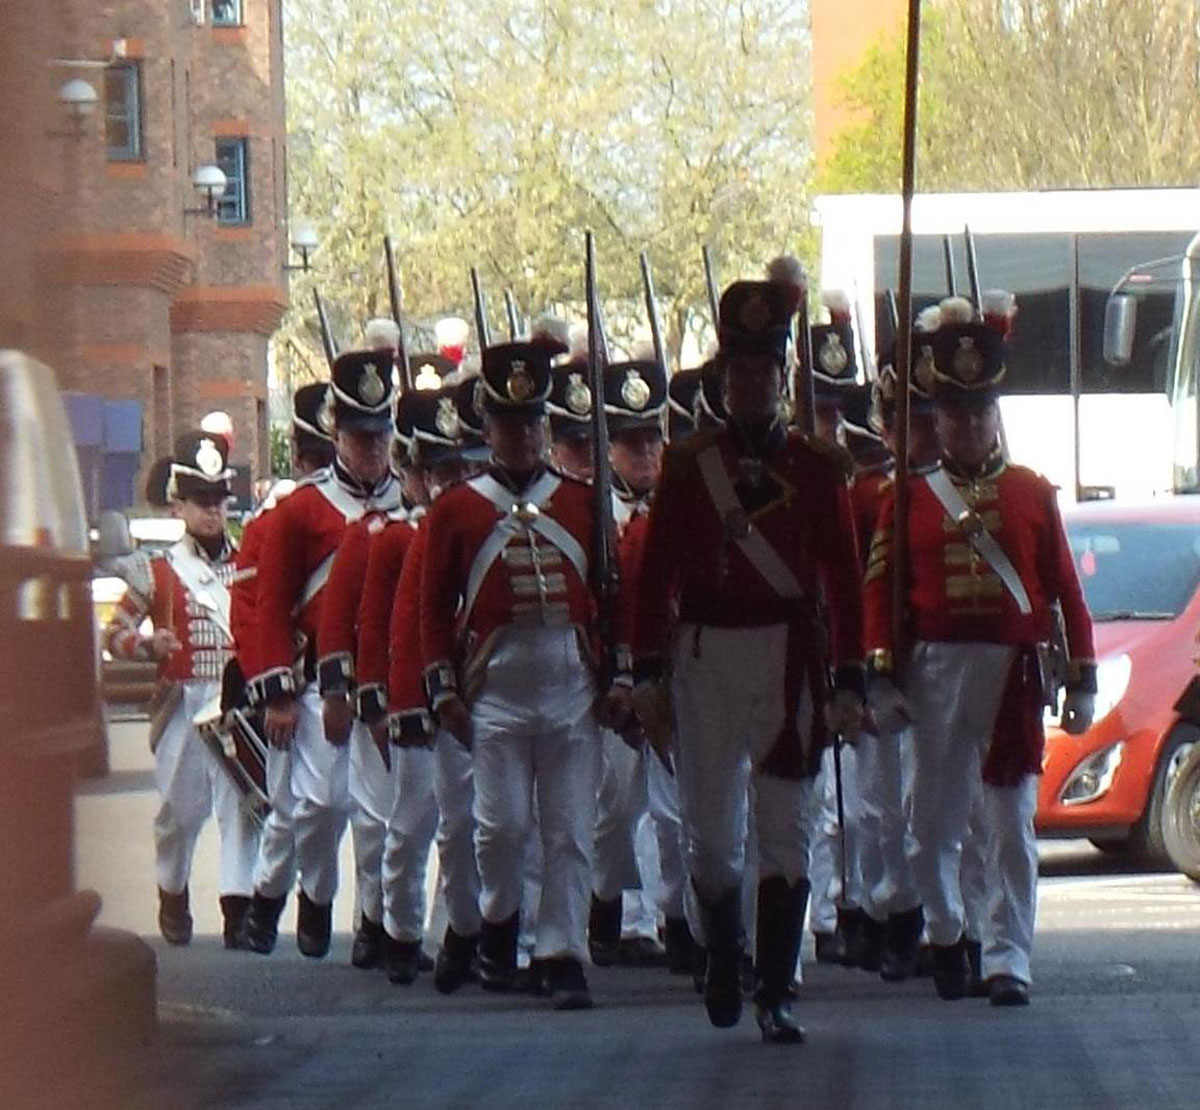 Re-enactors dressed in the uniform of the Coldstream Guards from 1815